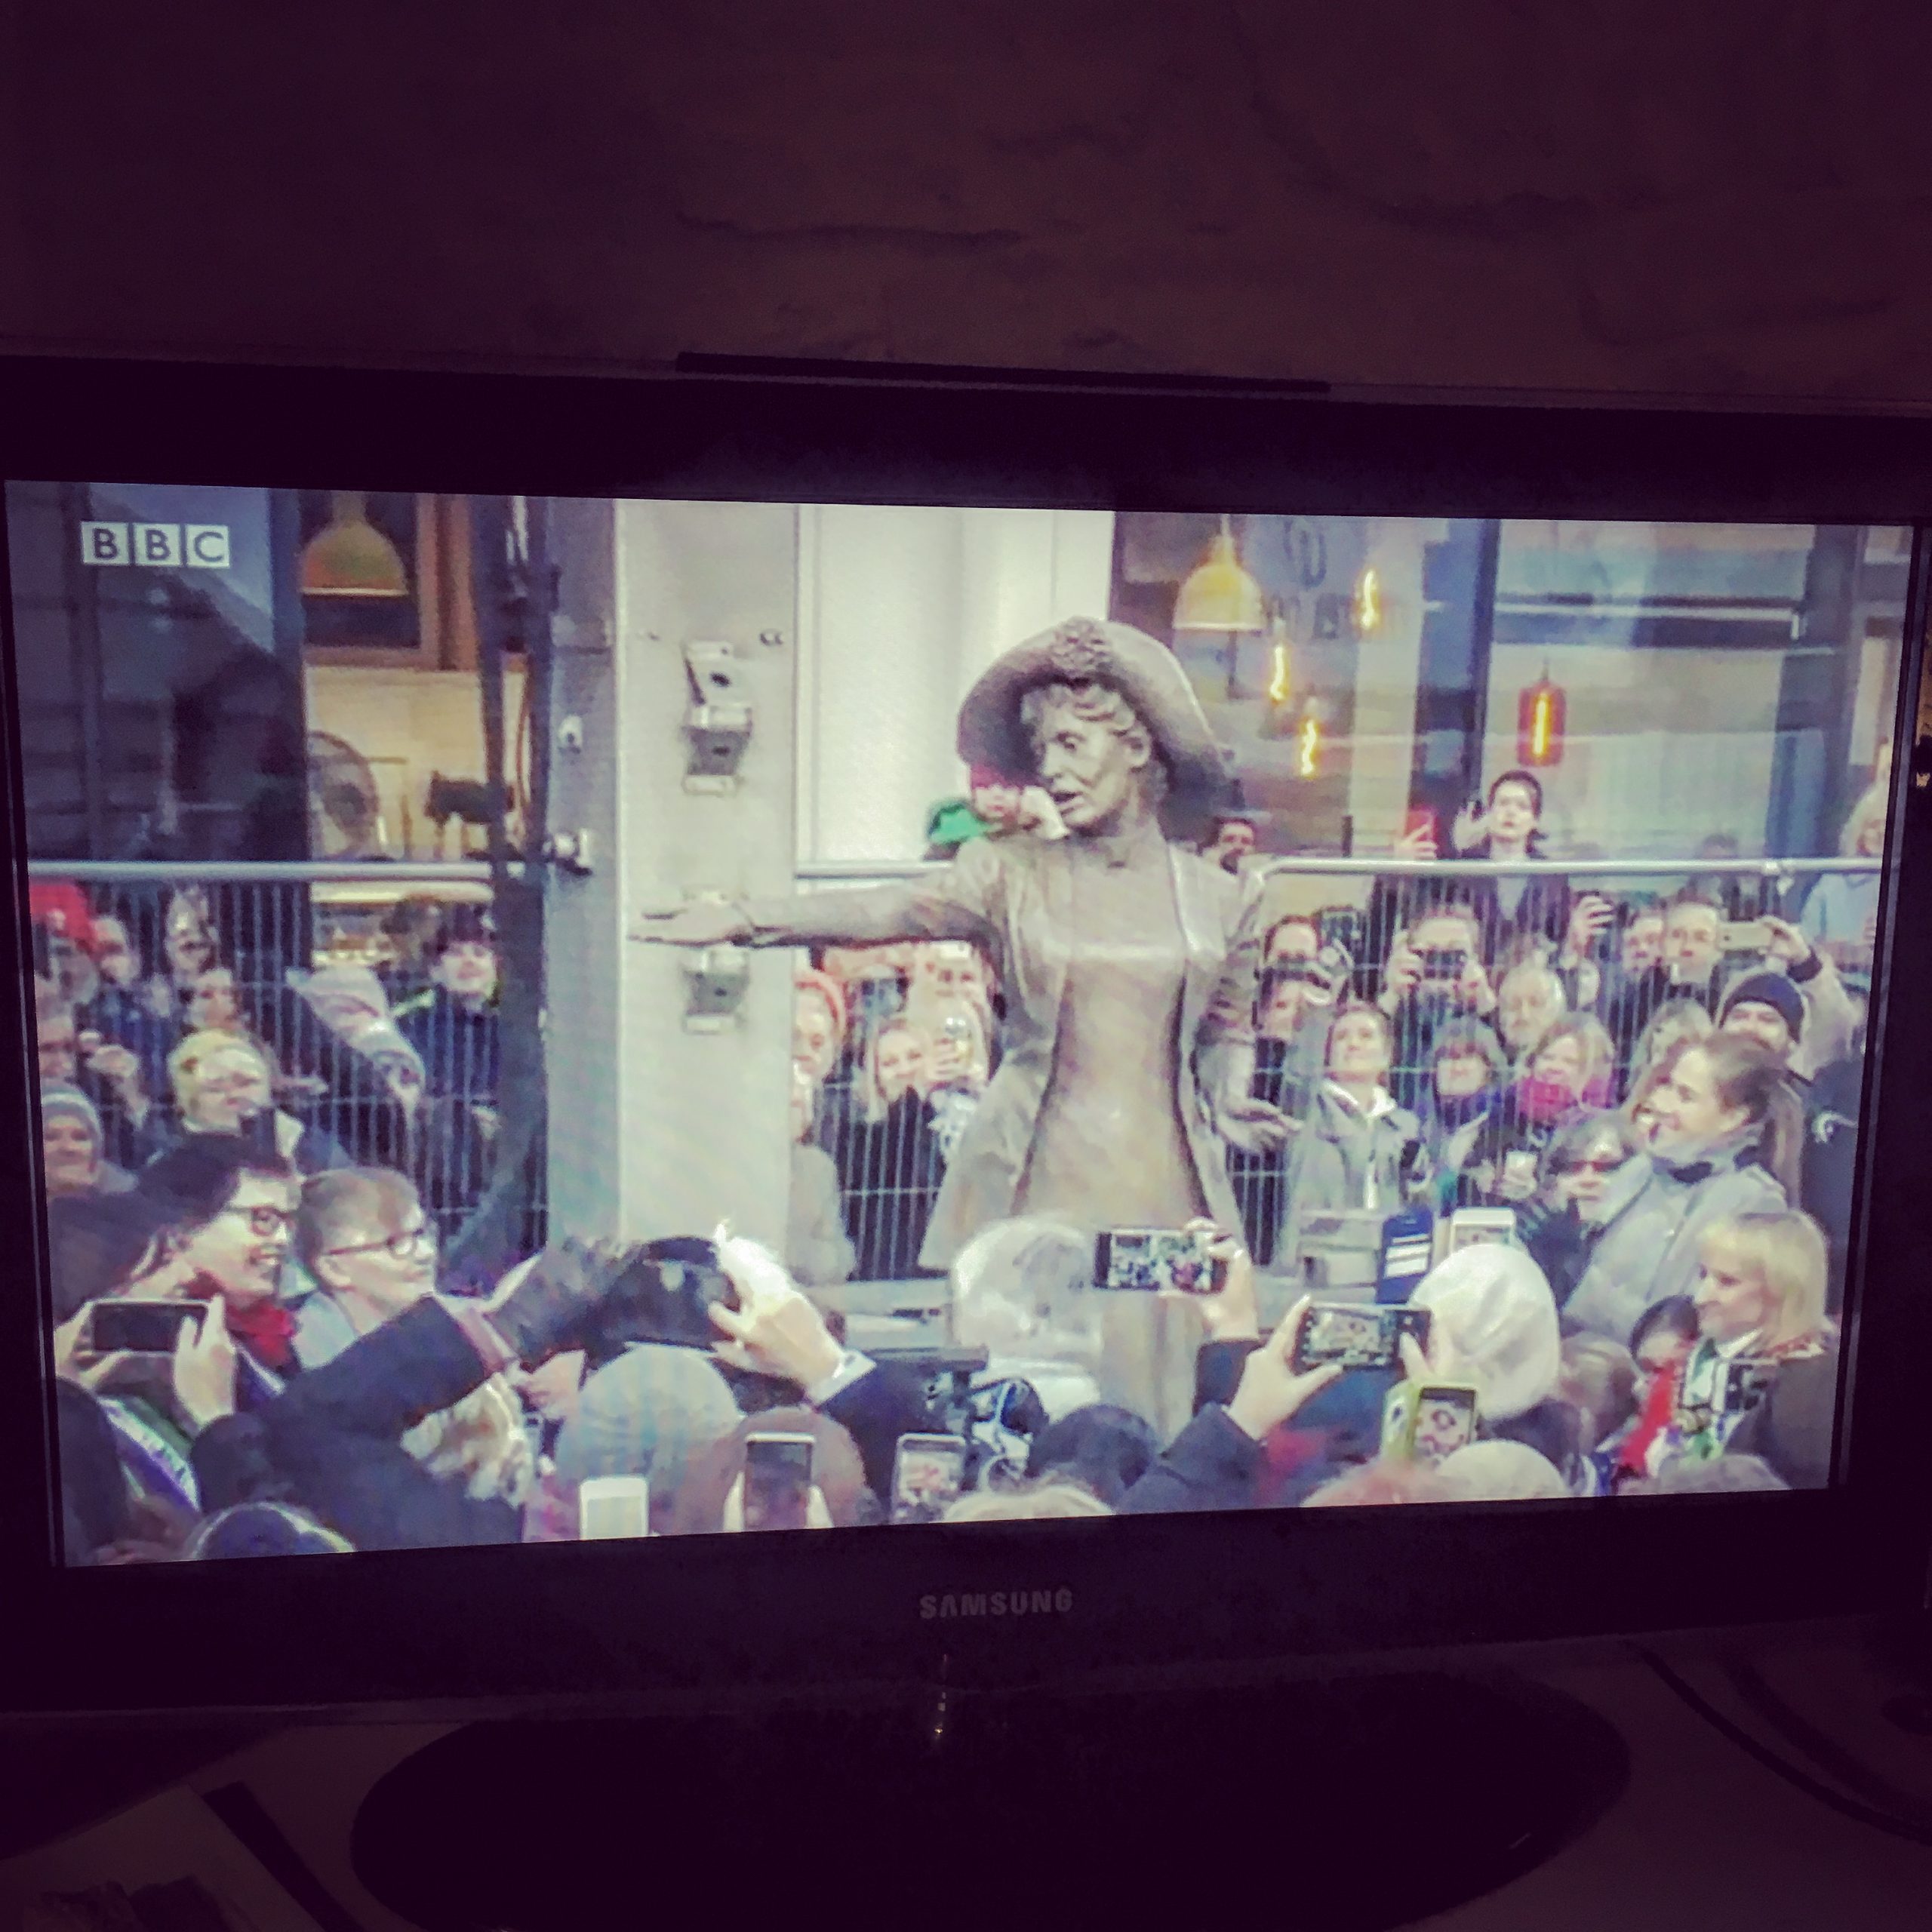 At last! Actually watching the unveiling of the Emmeline Pankhurst statue outside Manchester Central Library, on BBC NorthWest, in northern Istria!